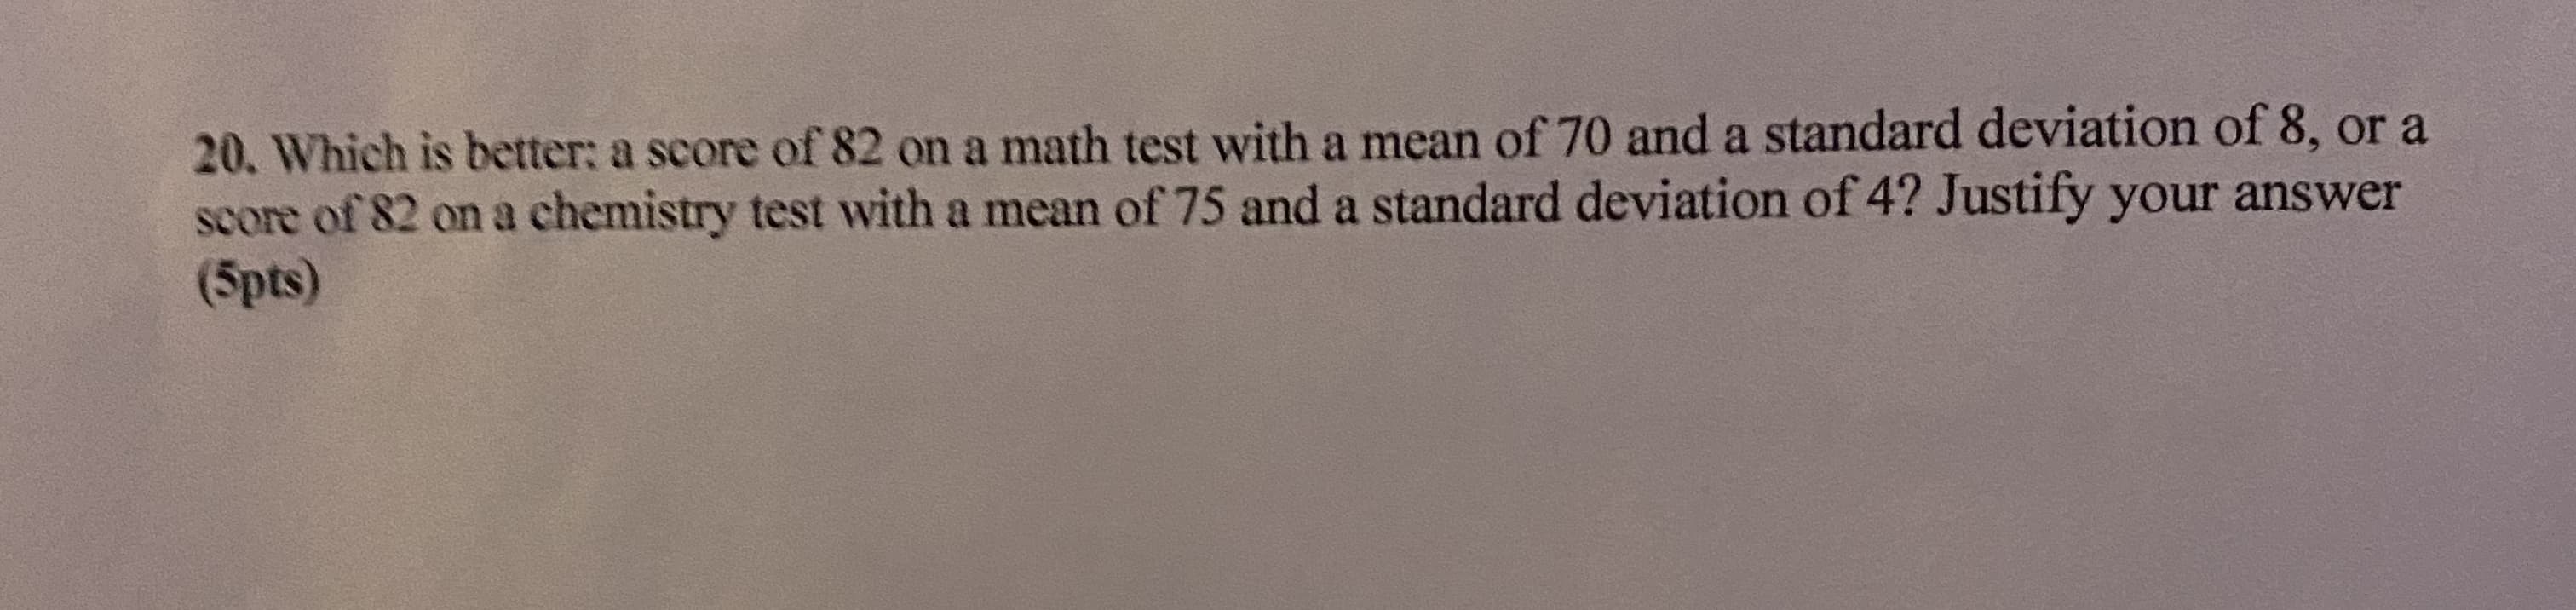 20. Which is better: a score of 82 on a math test with a mean of 70 and a standard deviation of 8, or a
score of 82 on a chemistry test with a mean of 75 and a standard deviation of 4? Justify your answer
(5pts)
